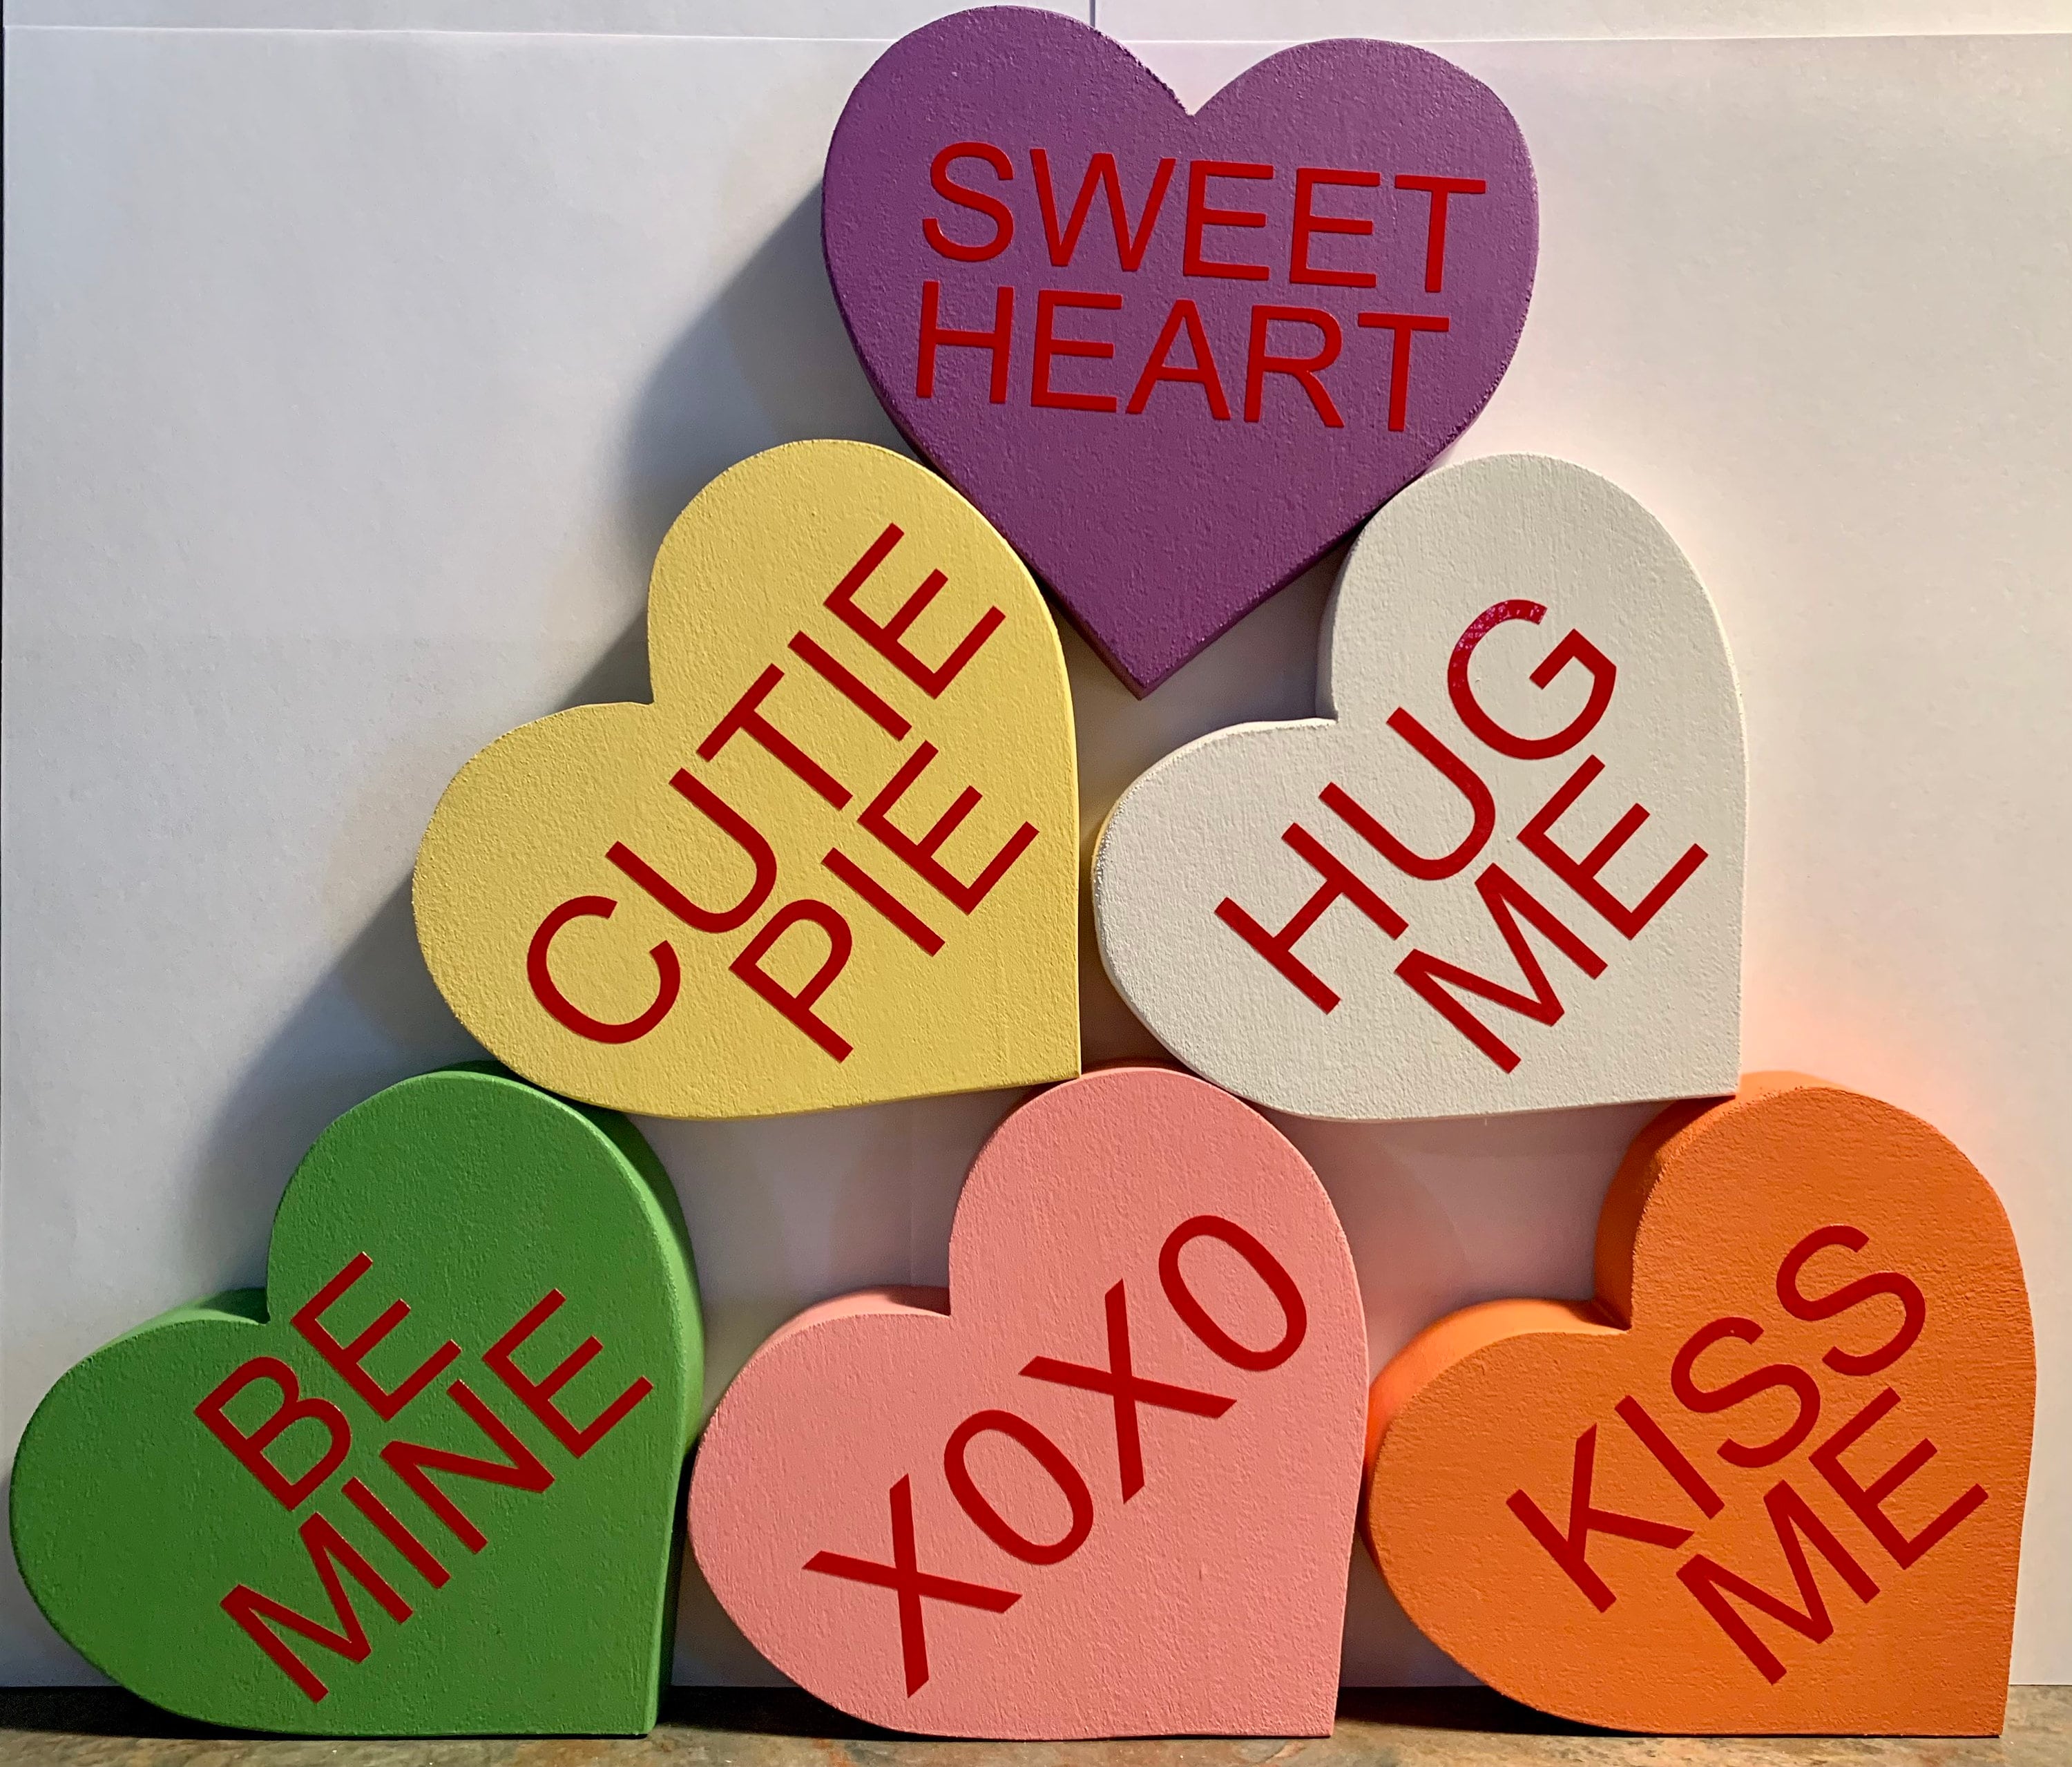 LARGE Conversation Hearts, Wood Sweetheart Candy Decor With CARVED Words  listing for Individual Hearts, Sold Each 